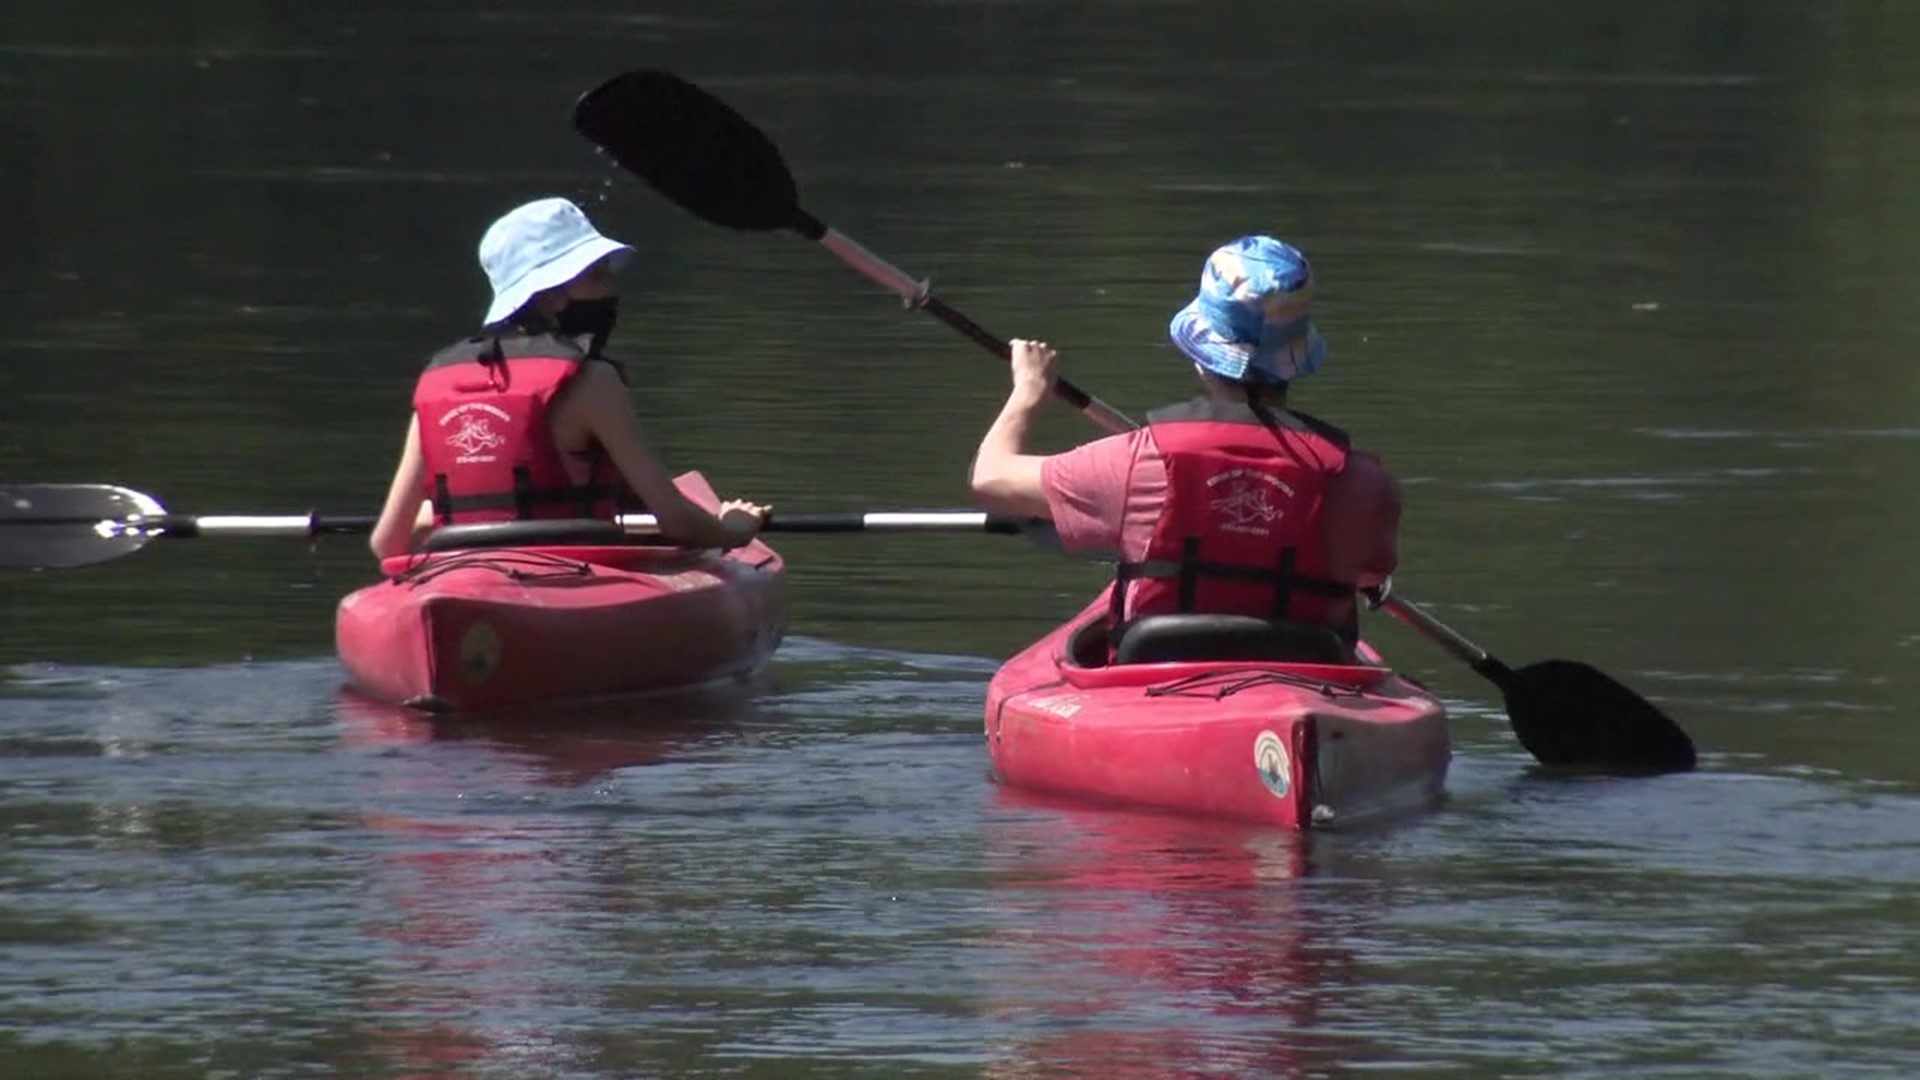 The nice weather means big business for canoe and rafting companies, especially in the Poconos.